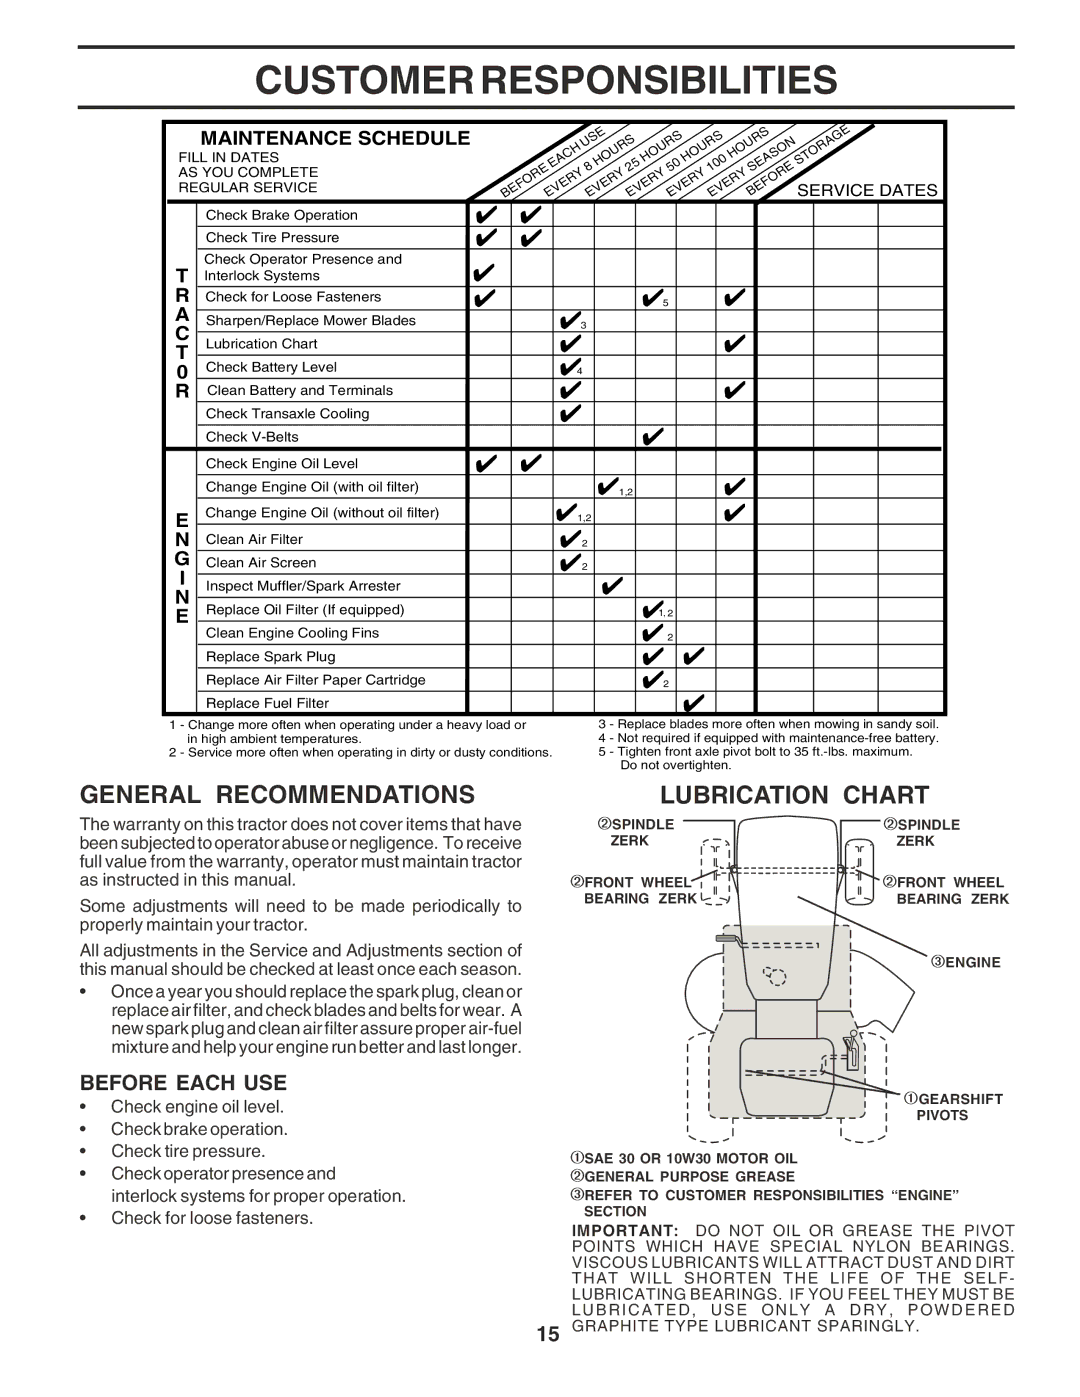 Poulan PPR2042STA owner manual Customer Responsibilities, General Recommendations Lubrication Chart, Before Each USE 